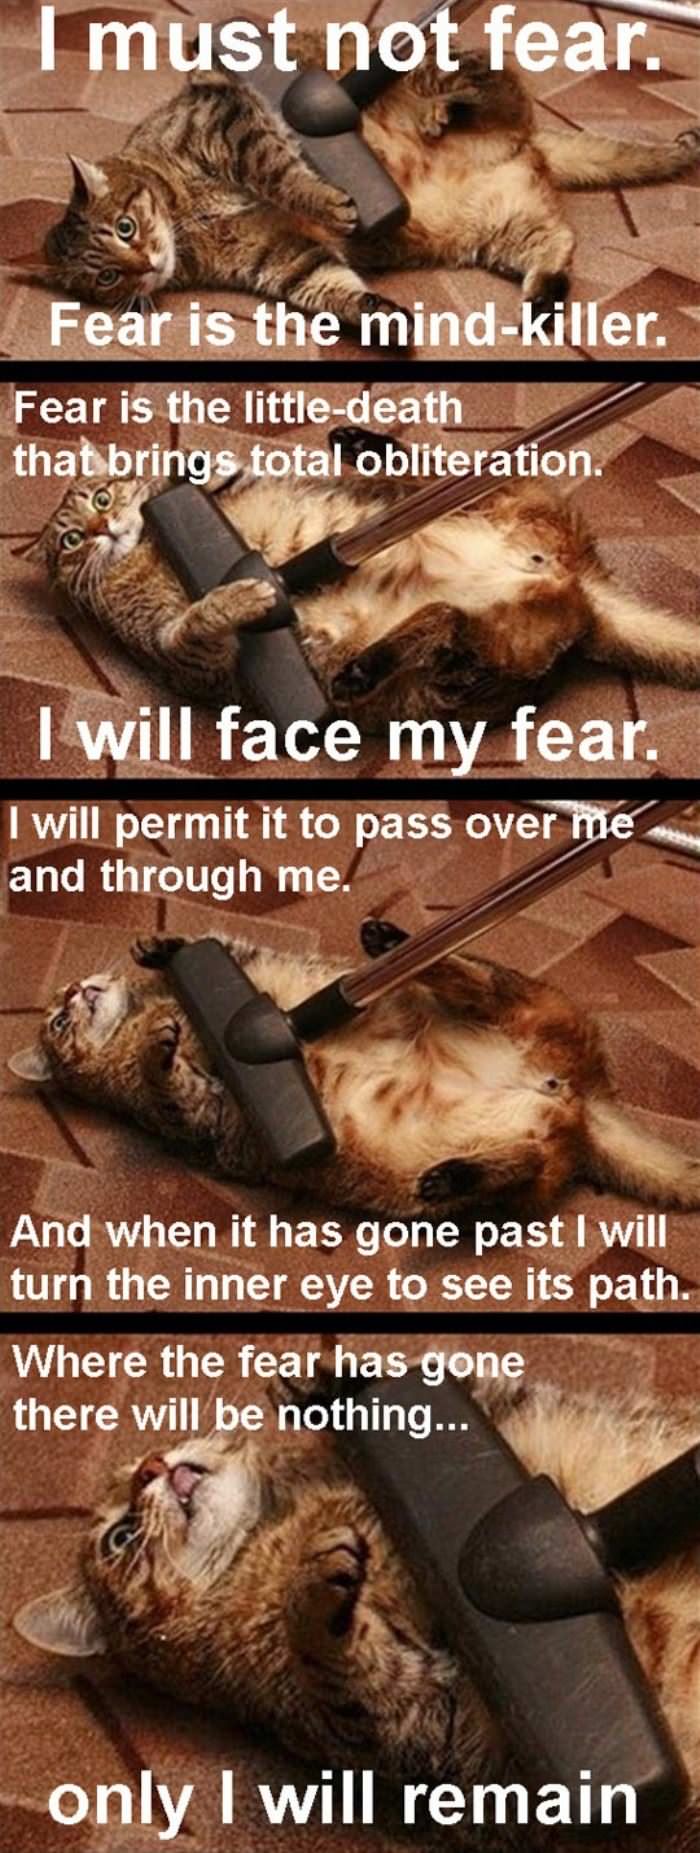 i must not fear funny picture